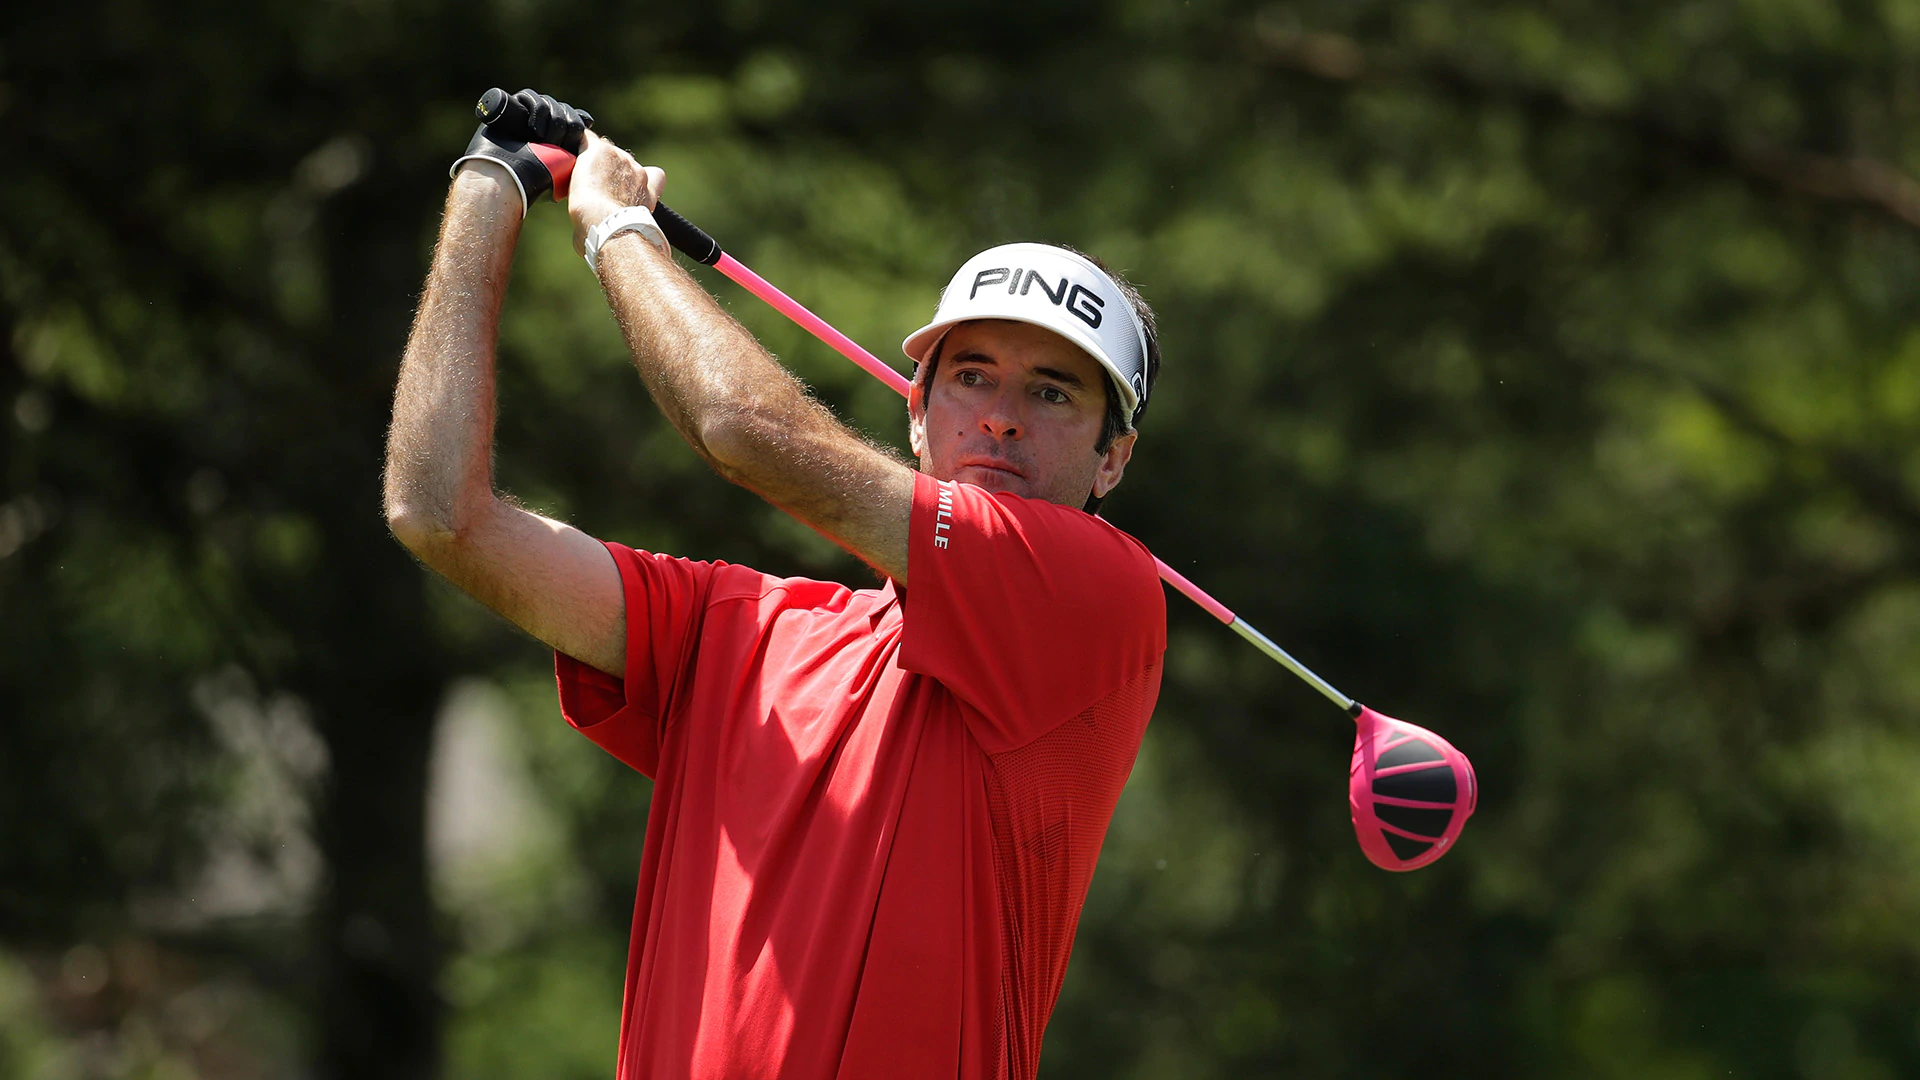 Bubba cuts layoff short to support Las Vegas